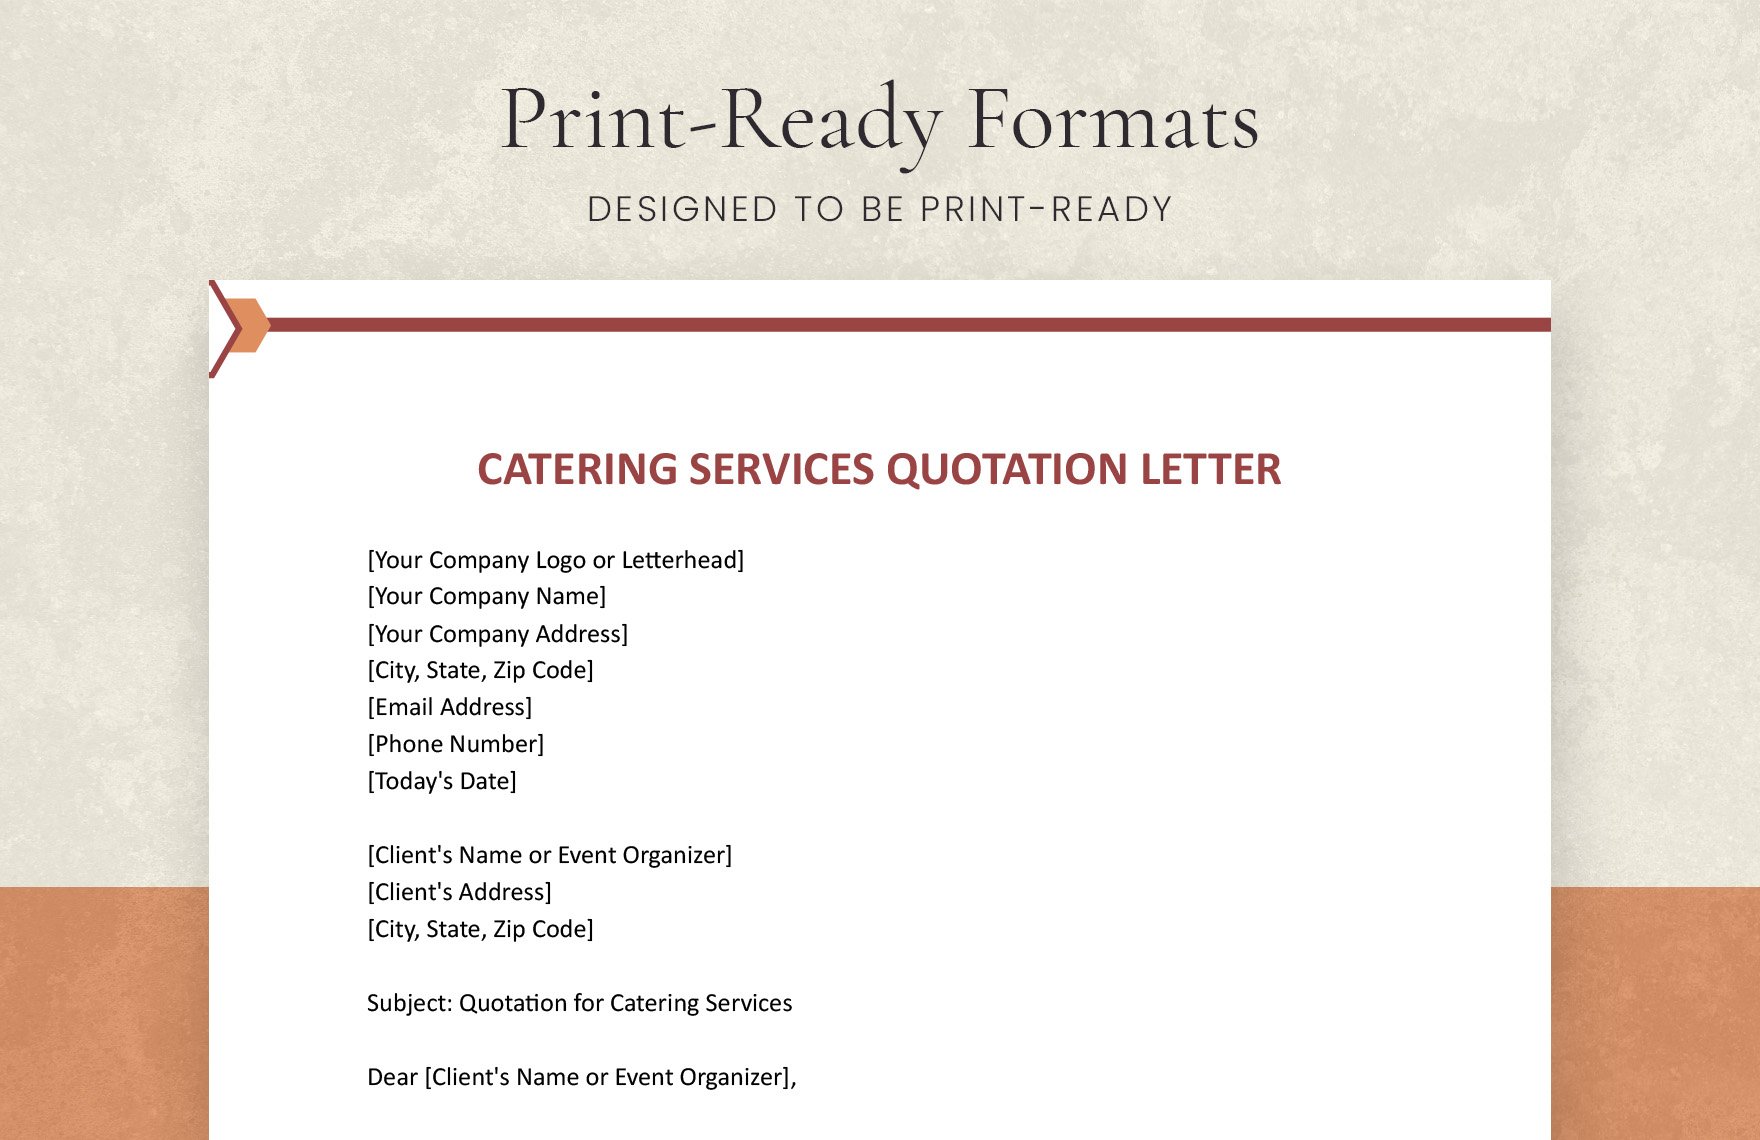 Catering Services Quotation Letter